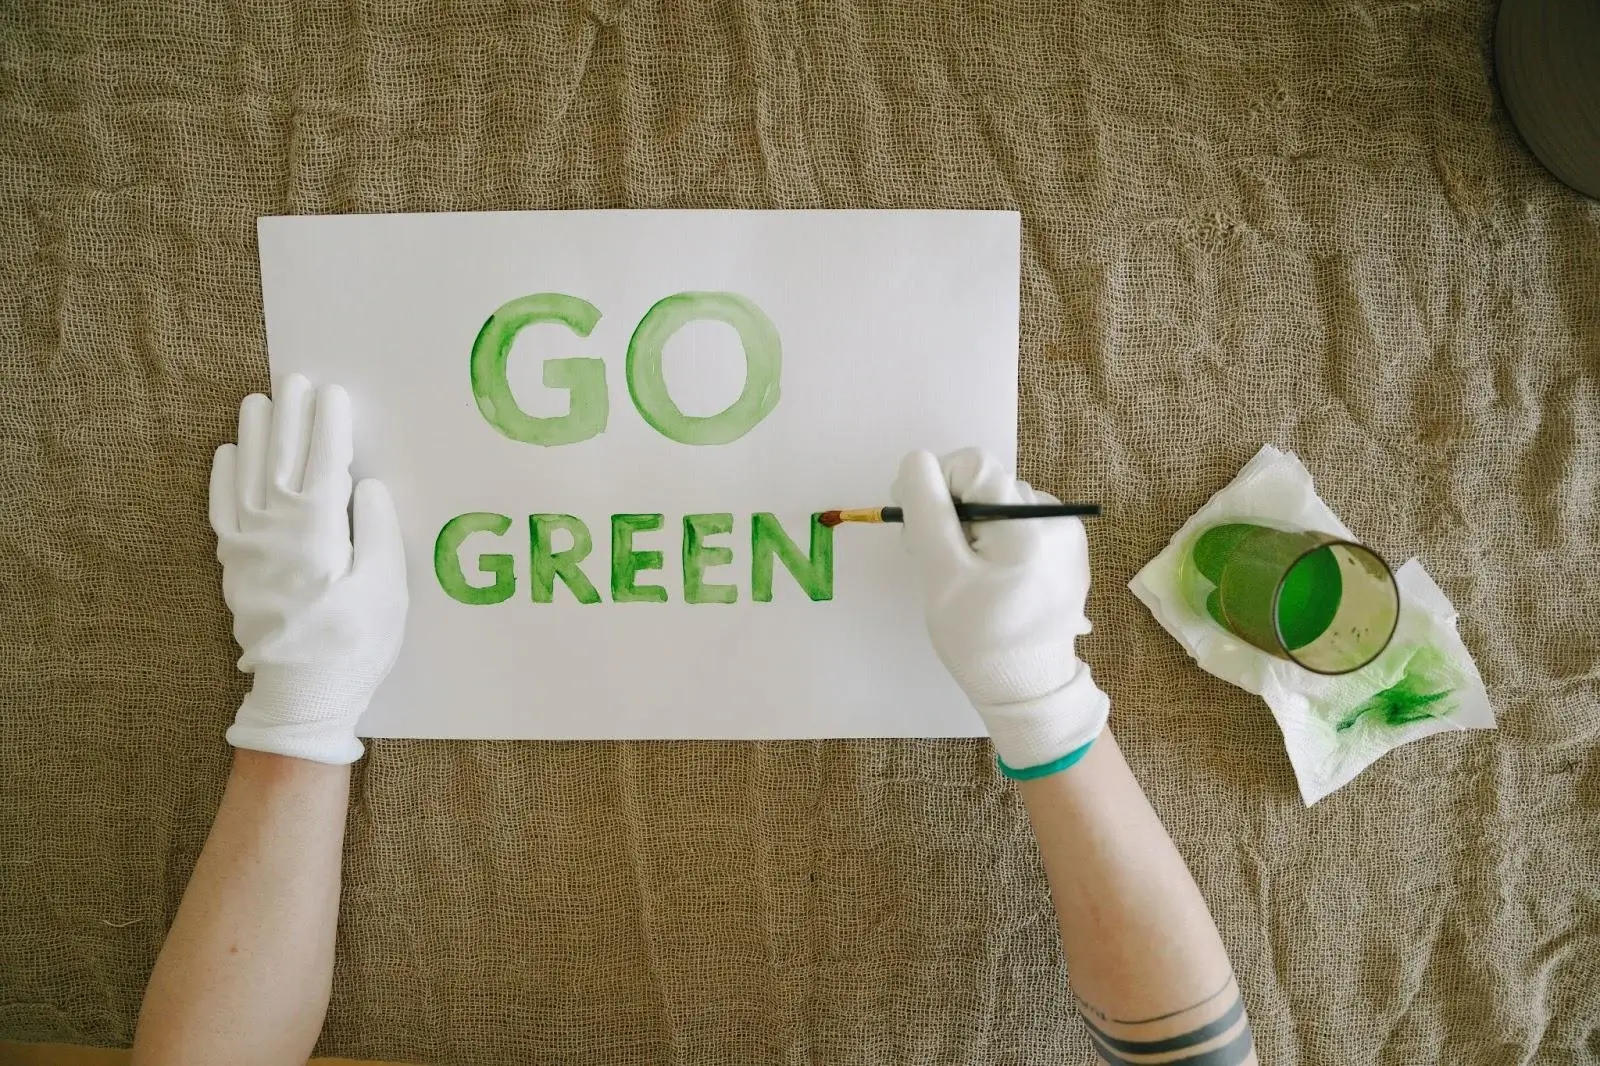 A person using a paint brush to paint the words "Go Green" in green paint on a piece of paper.